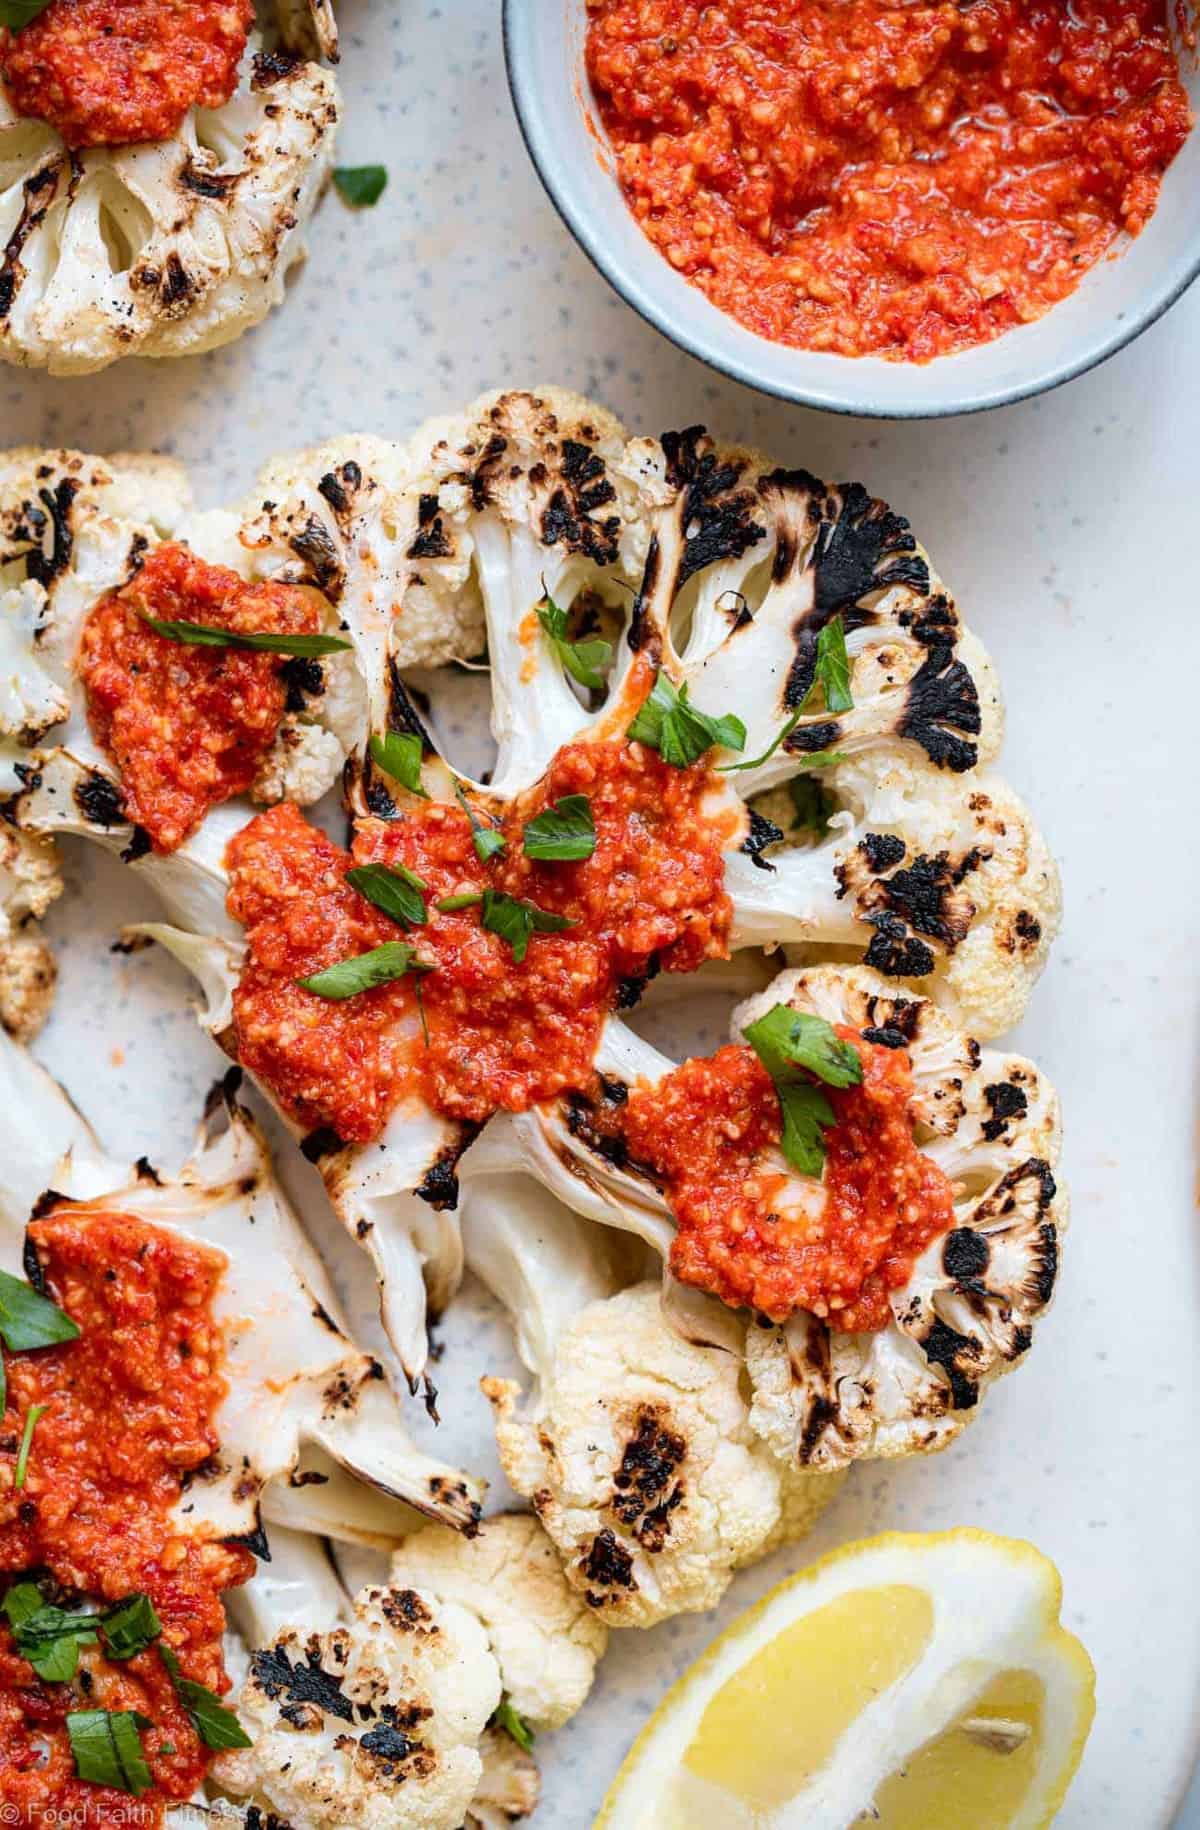 A close up of a grilled cauliflower steak with romesco sauce